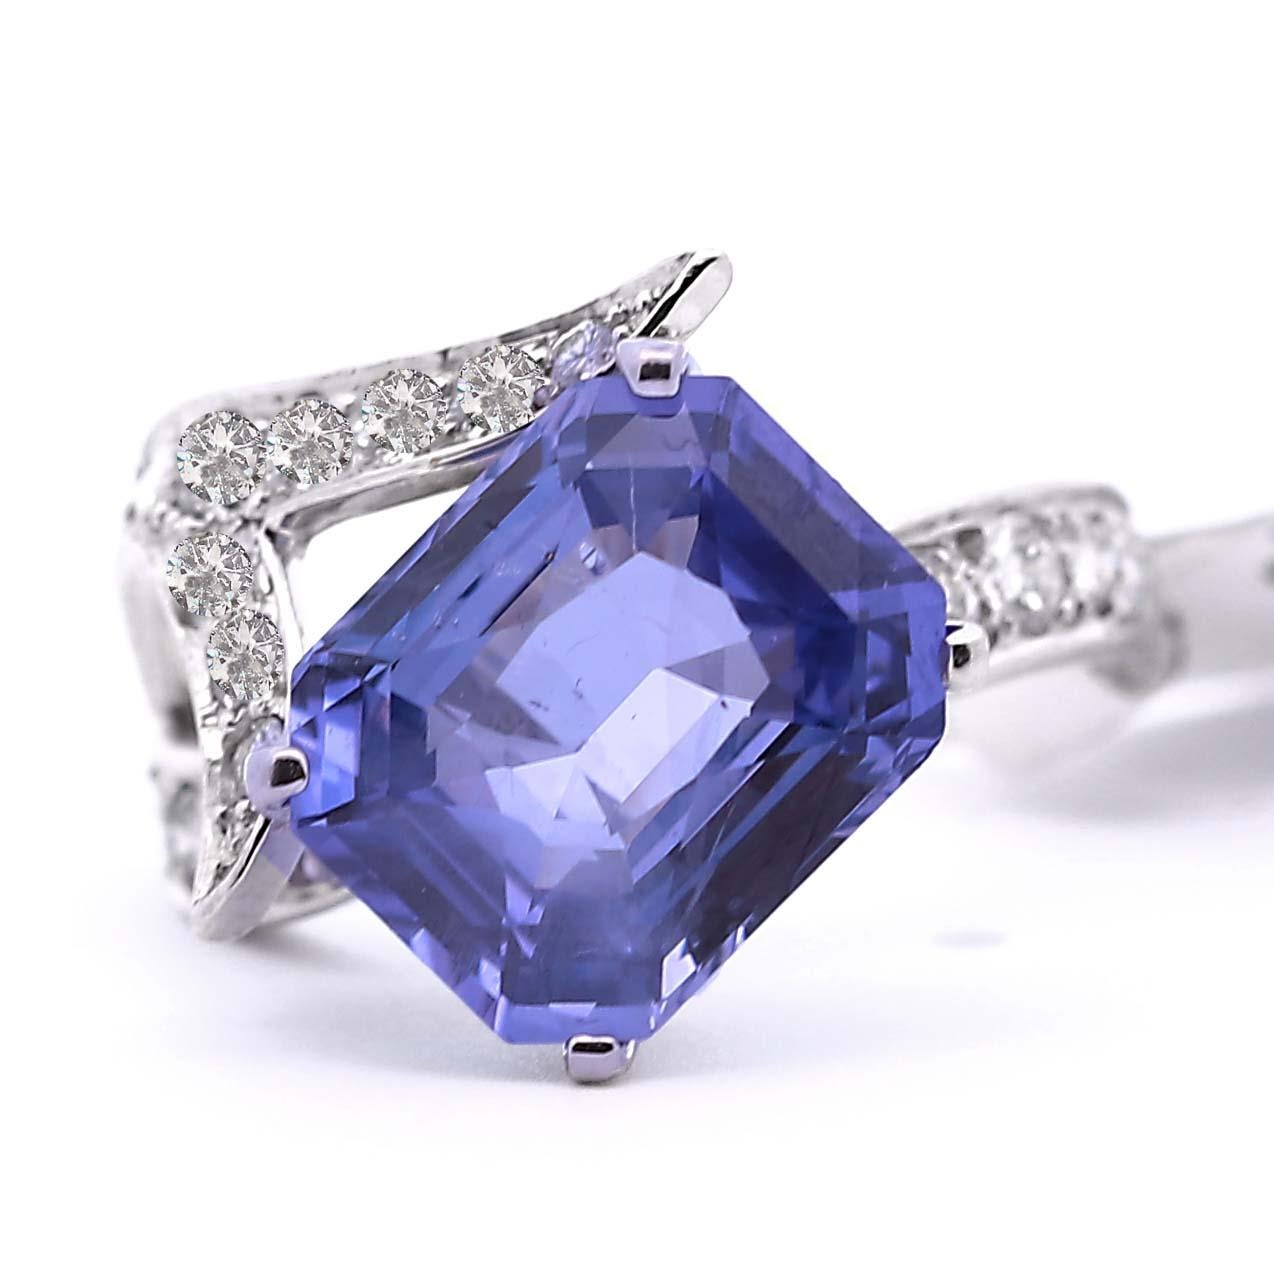 GIA-certified 6.19 ct. No Heat Color Change Sapphire Cocktail Ring. This extraordinary contemporary piece features a bright Violetish Blue sapphire that transcends to Purple. The white gold setting, adorned with diamonds, enhances the stone's